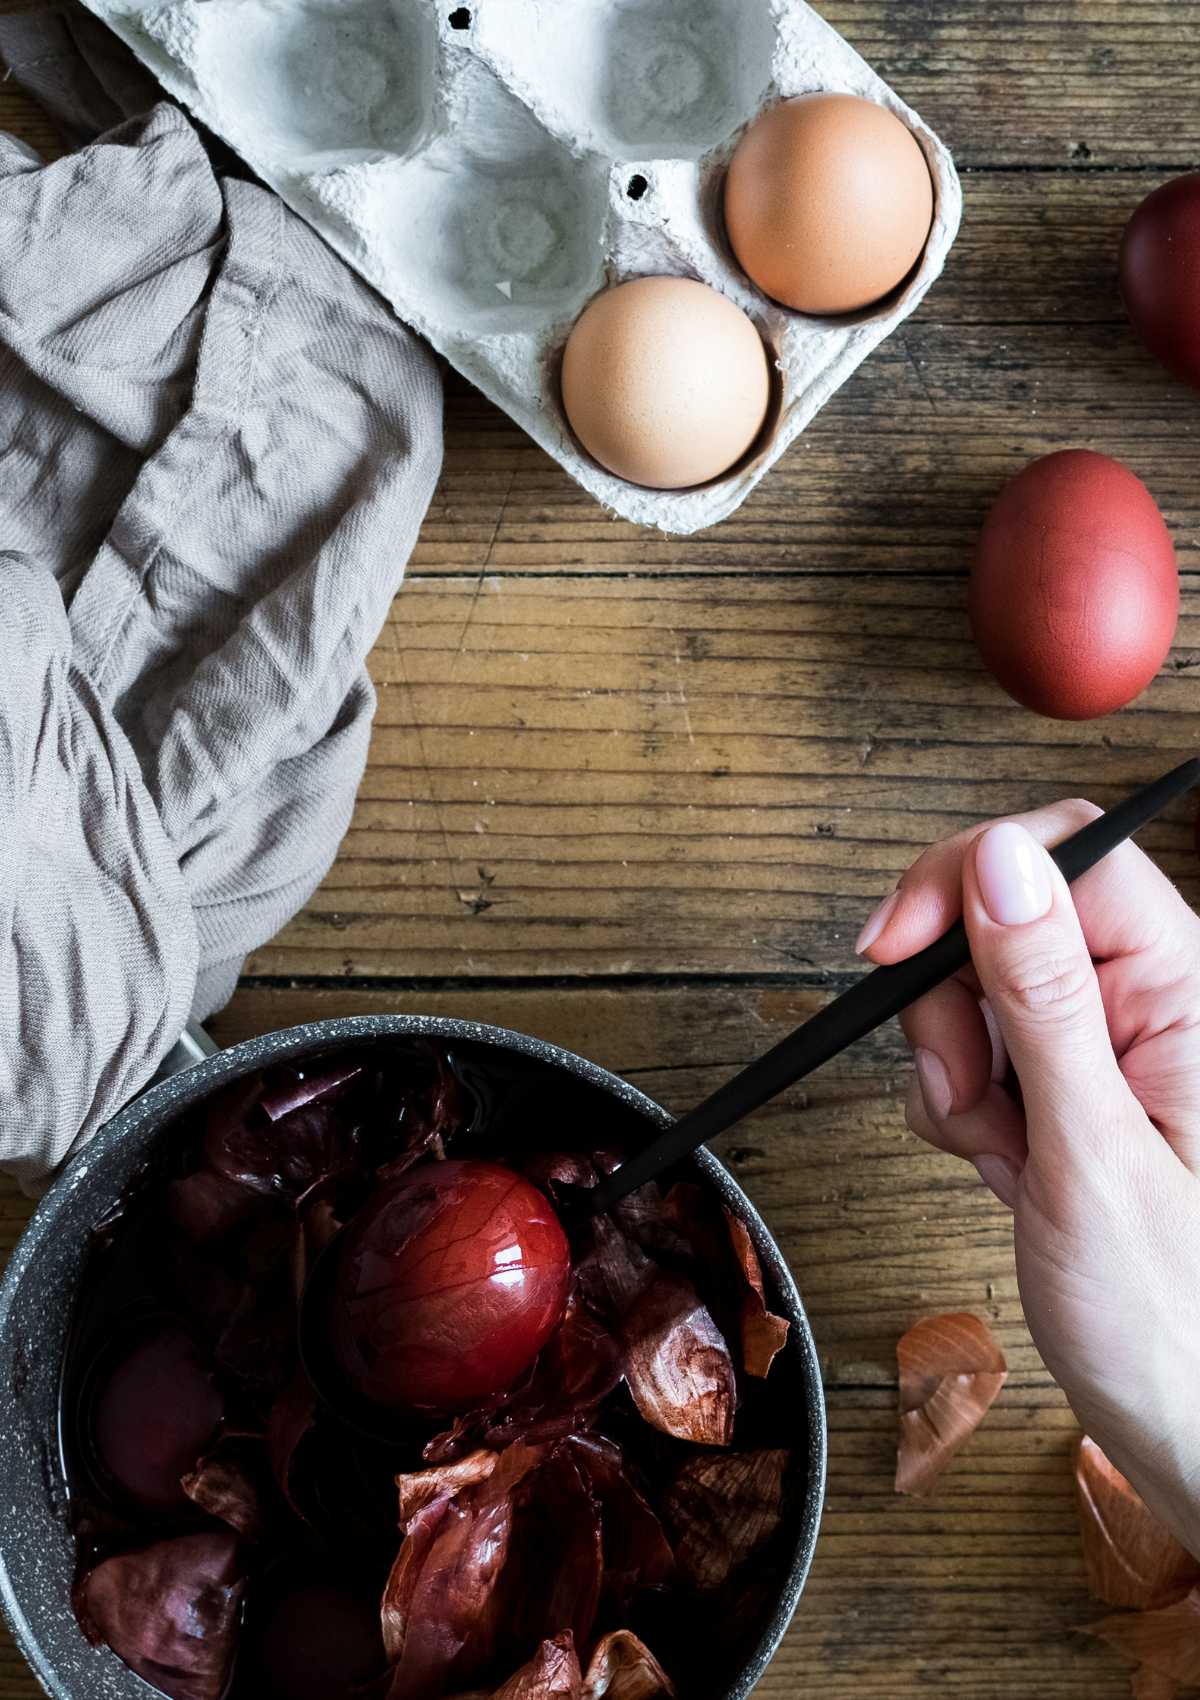 The process of dyeing Easter eggs with onion skins